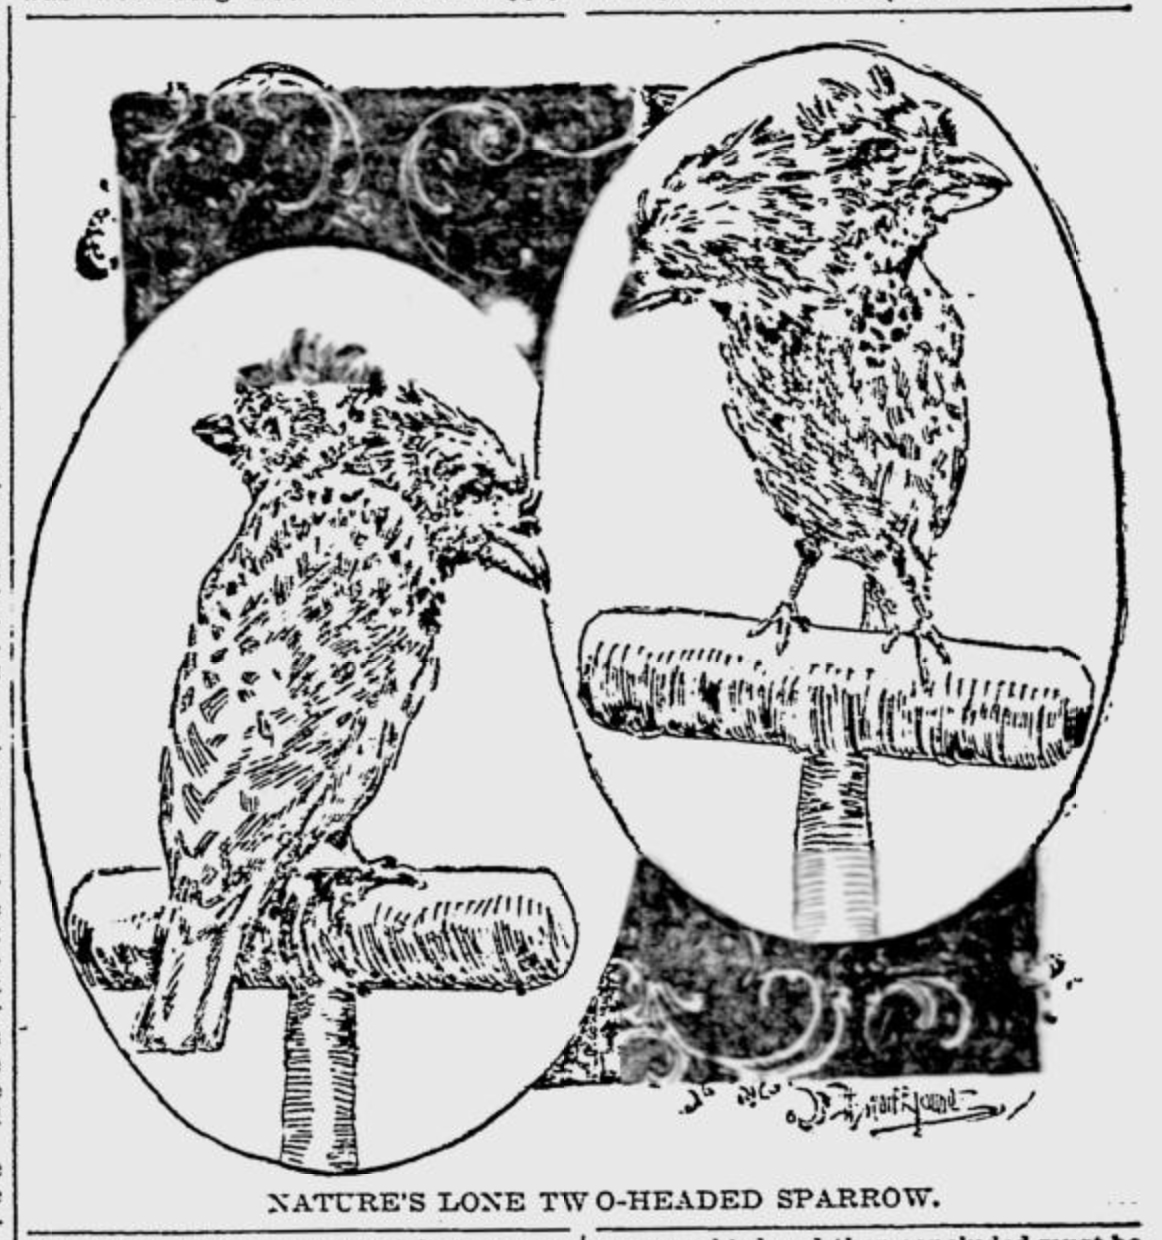 A two-headed sparrow, as seen in the Baltimore Sunday Herald, Jan. 9, 1898.